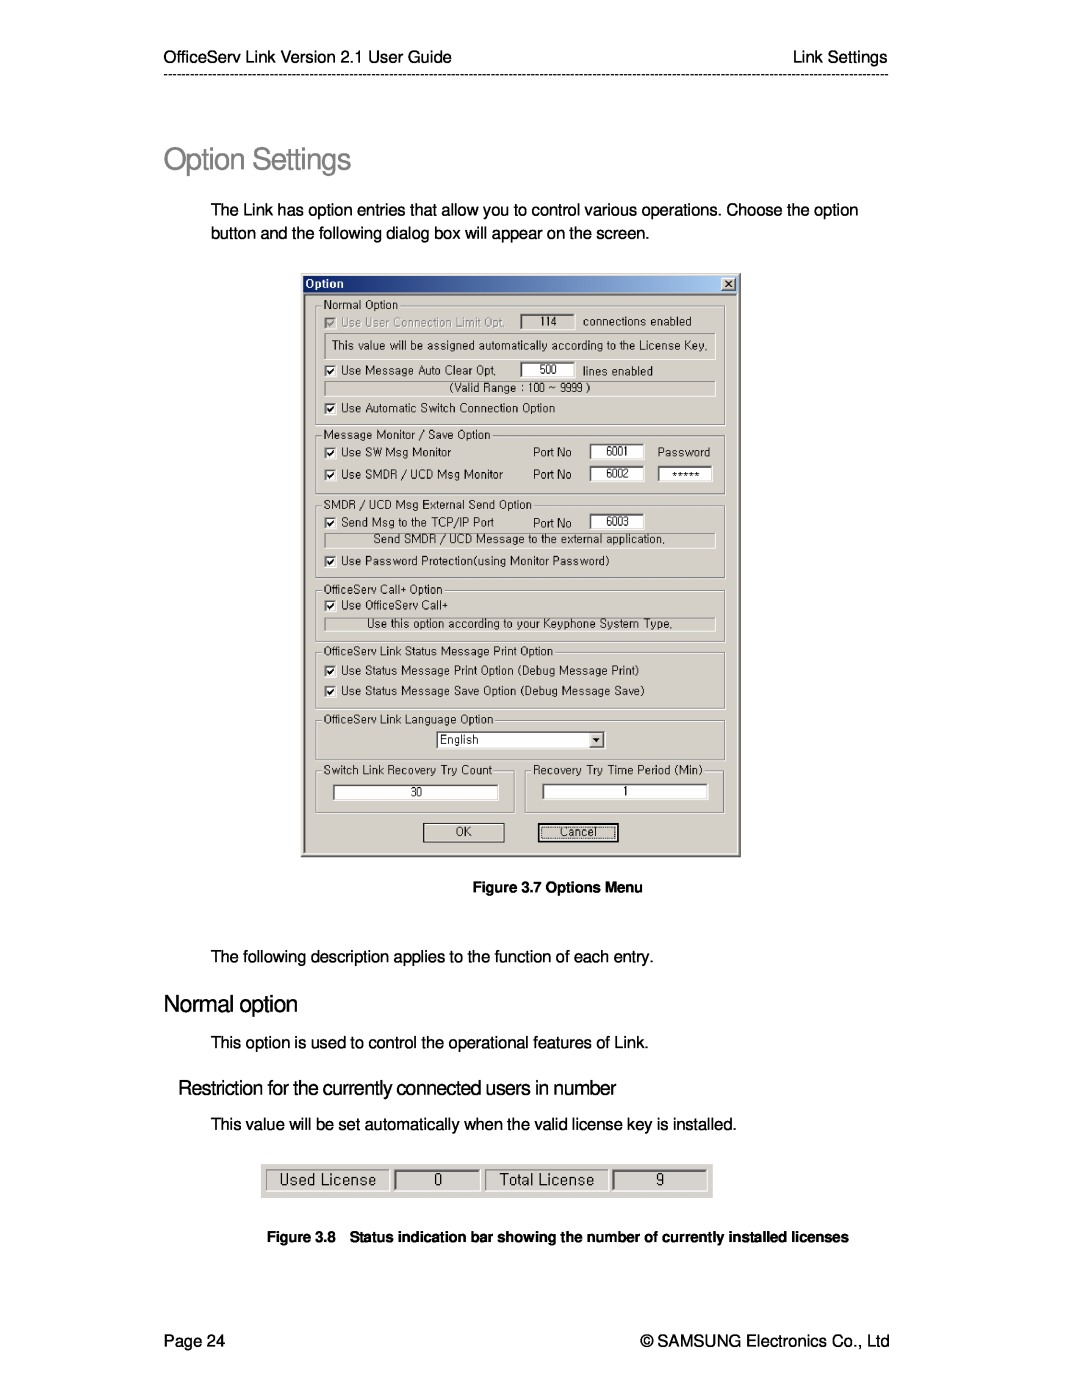 Samsung Version 2.1 manual Option Settings, Normal option, Restriction for the currently connected users in number 